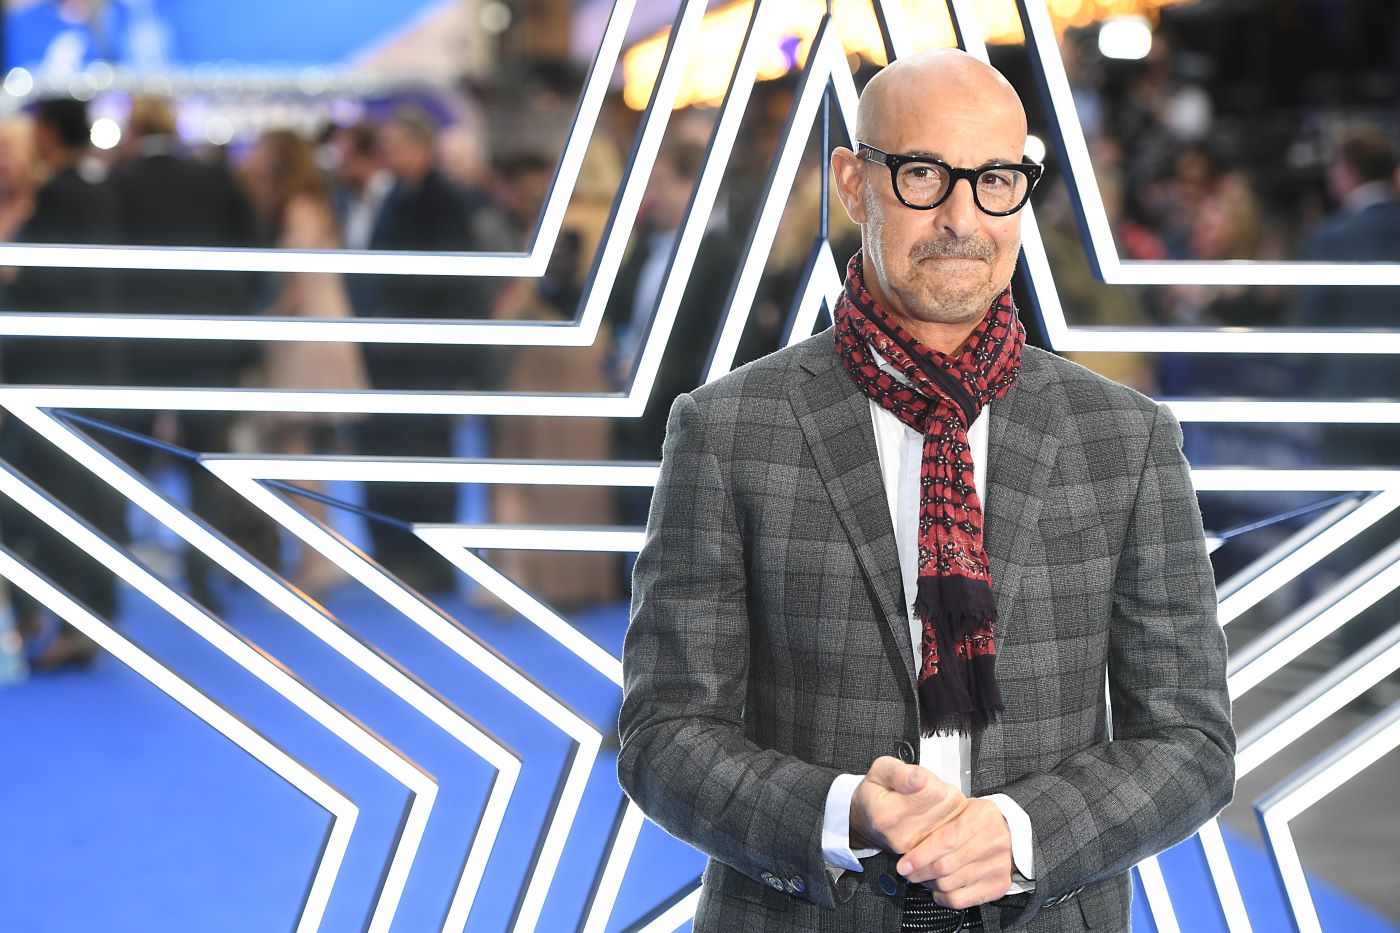 Stanley Tucci dressed in a black and grey plaid suit standing in front of a metal star with multiple layers of the shape from big to small.